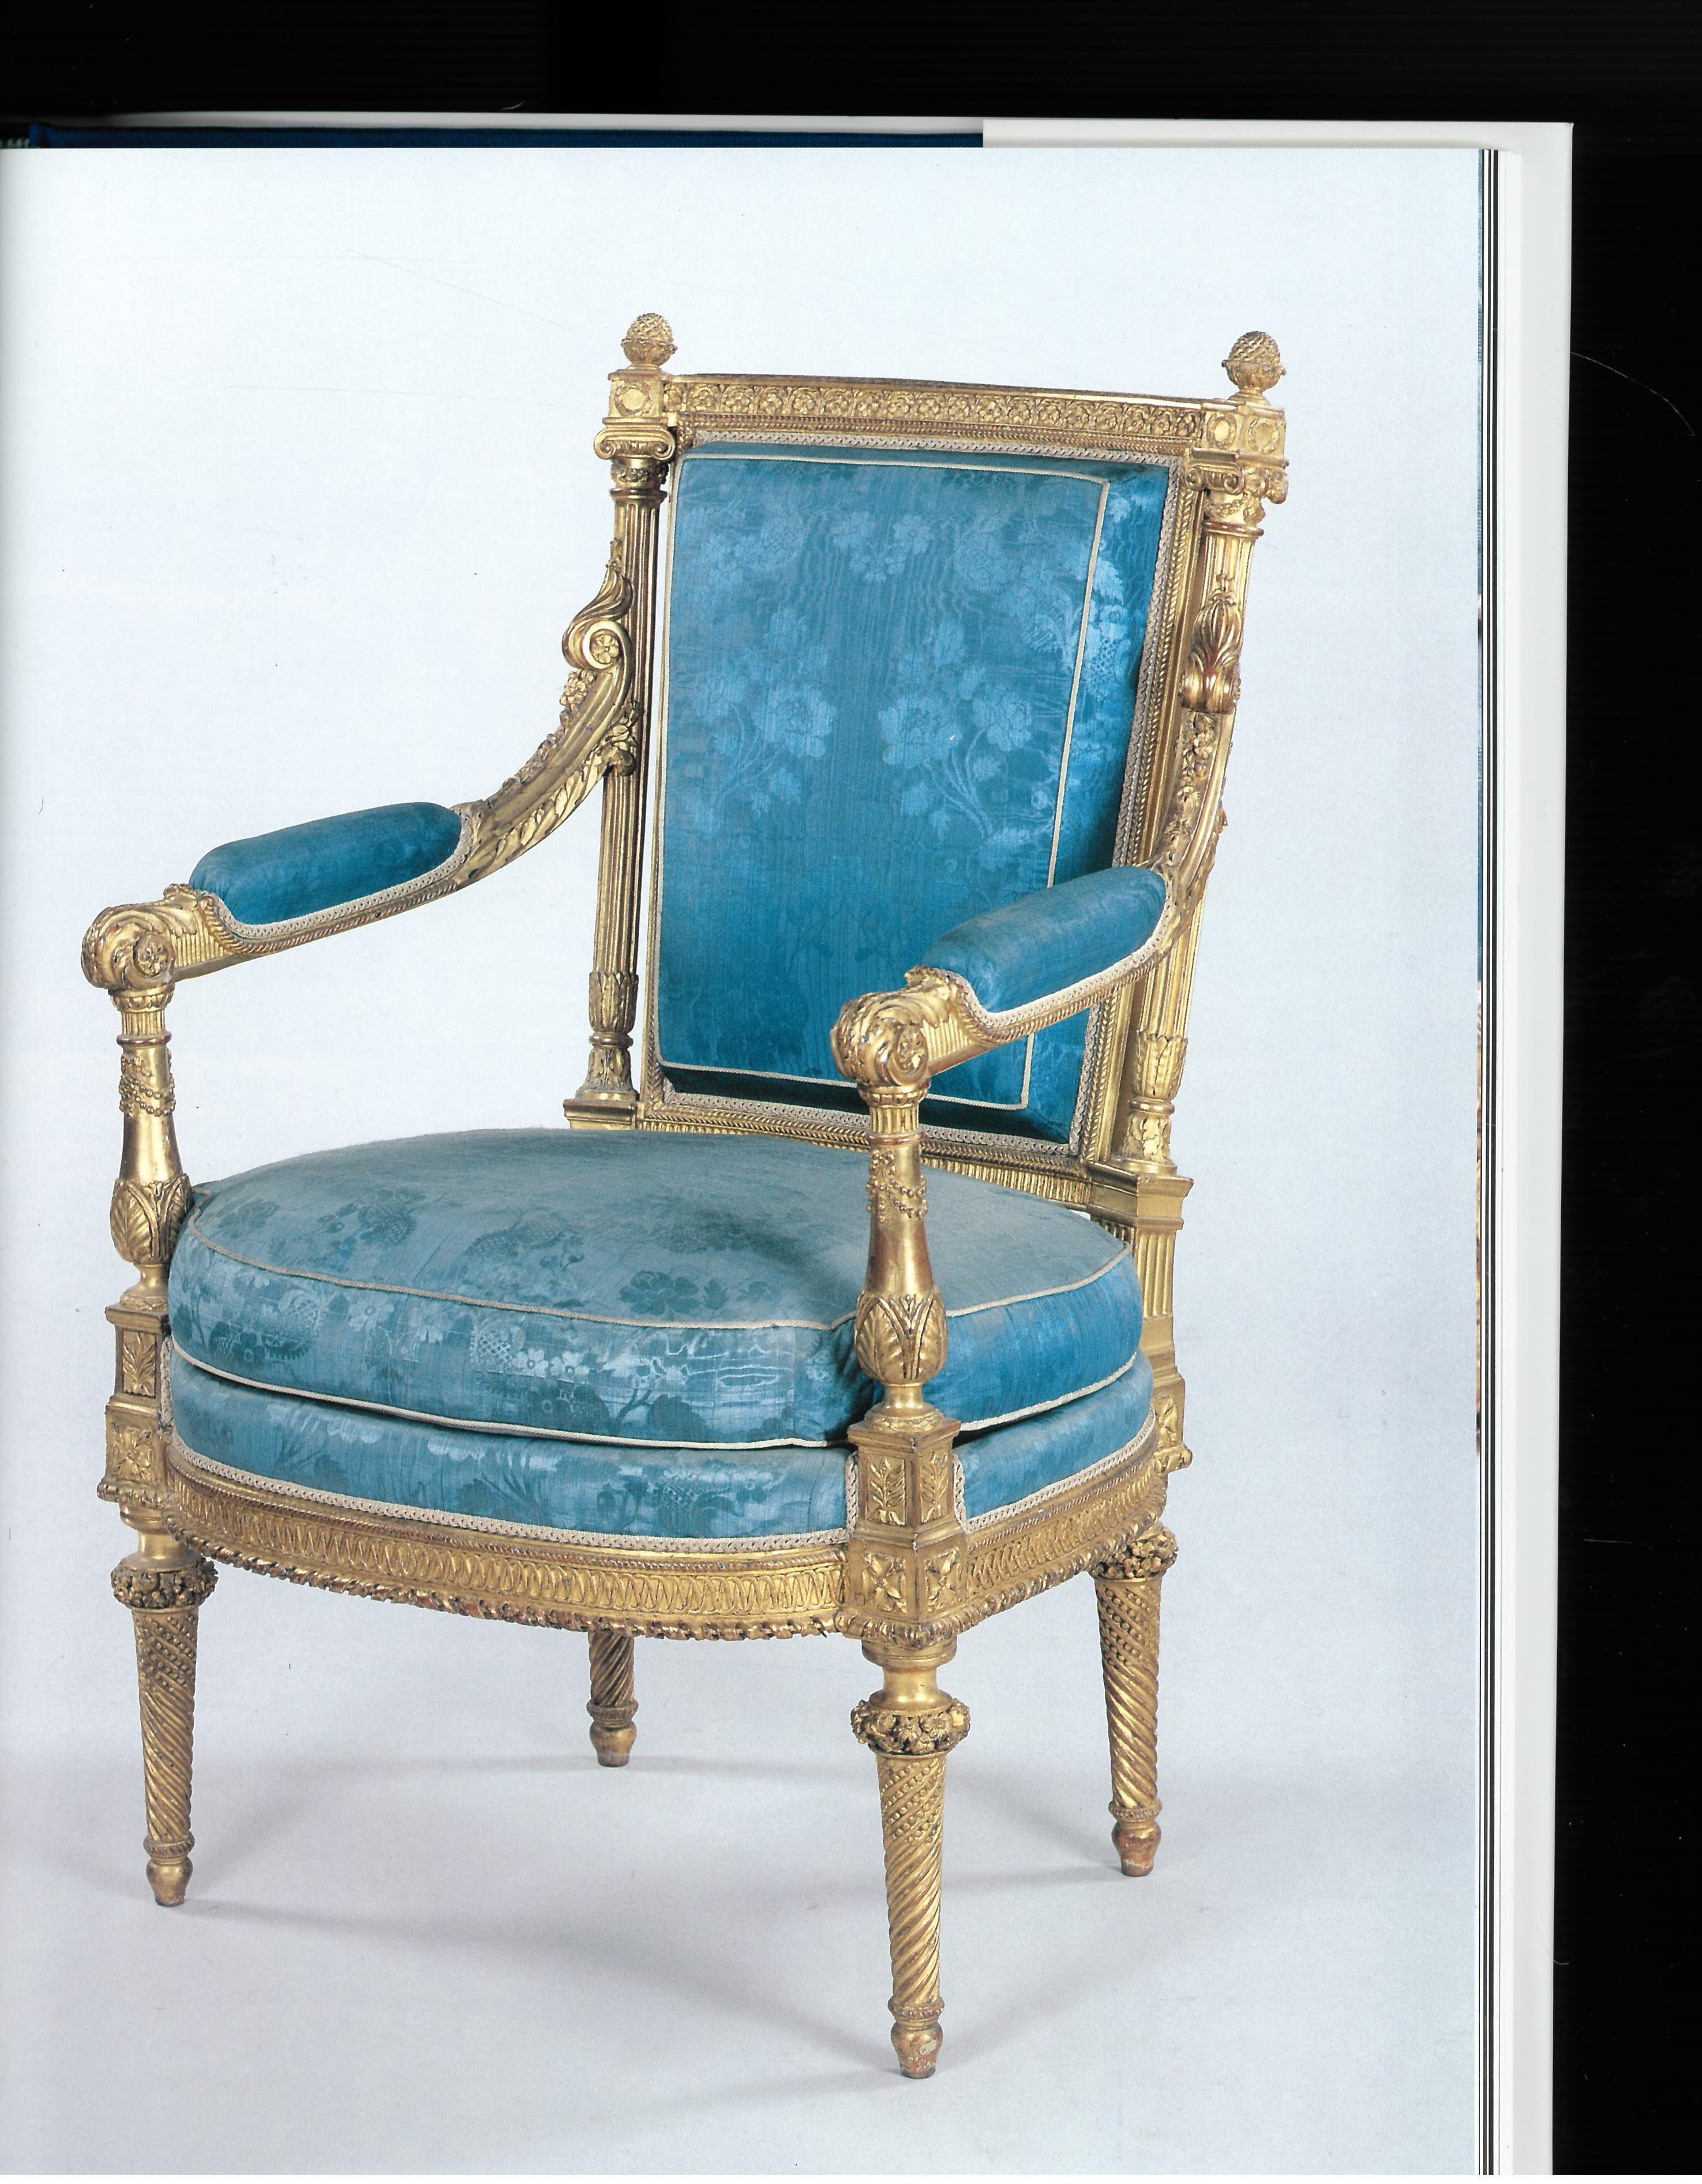 Paper Furniture Collections in the Louvre (Book)